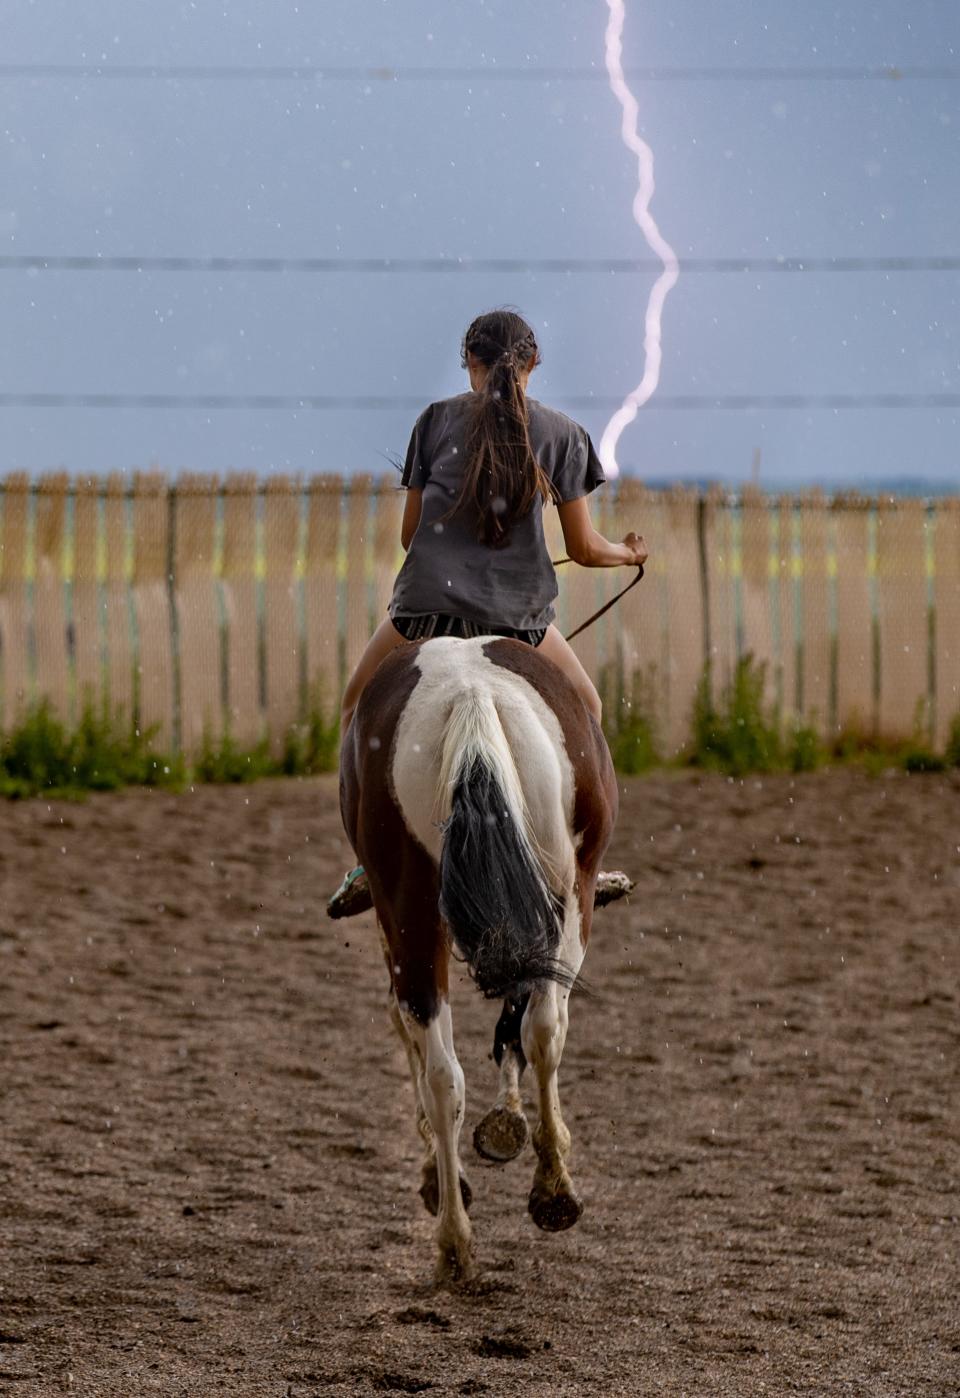 Lightning strikes in the distance as a young rider takes off on a horse at the Parshall Lucky-Mound Rodeo in North Dakota.